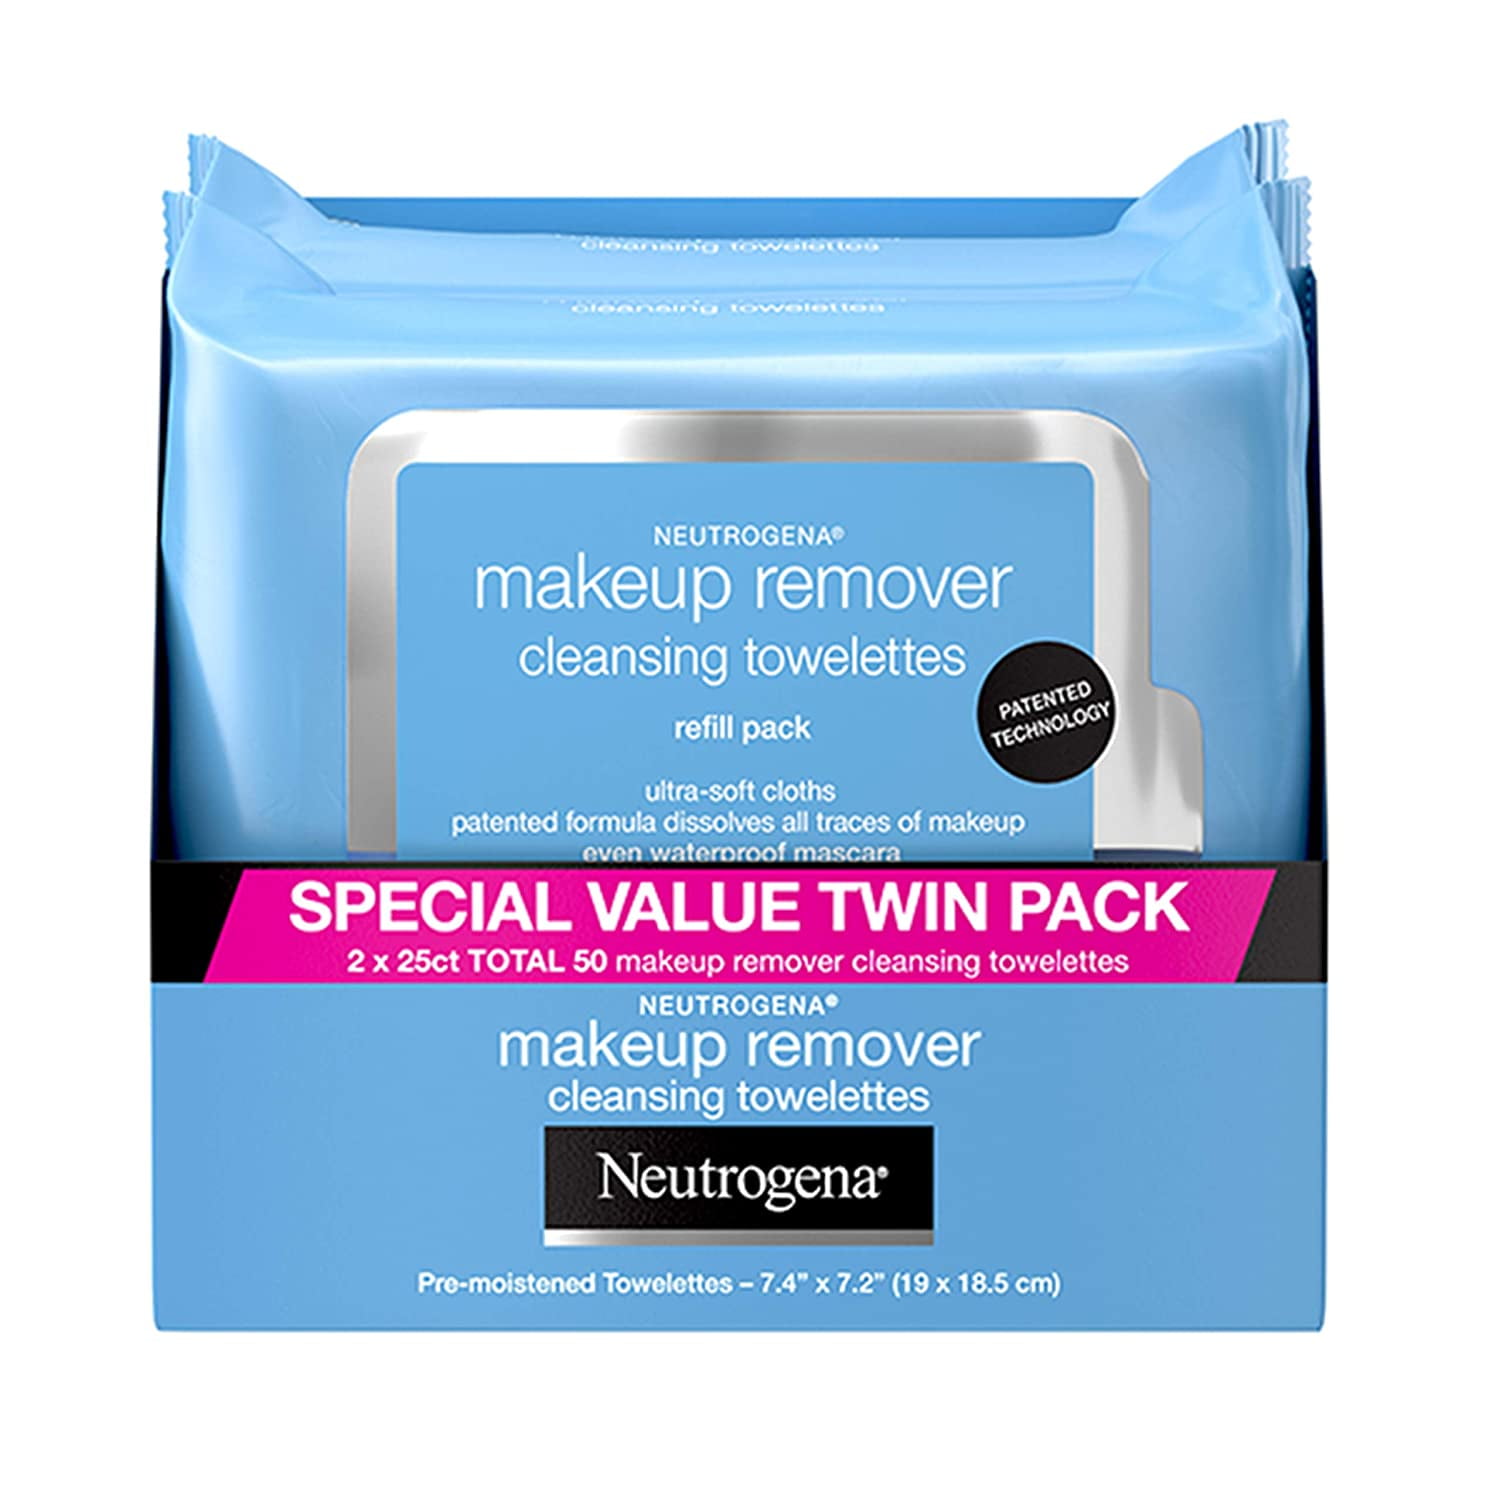 at tilbagetrække bytte rundt lyse Neutrogena Makeup Remover Cleansing Face Wipes, Daily Cleansing Facial  Towelettes to Remove Waterproof Makeup and Mascara, Alcohol-Free, Value  Twin Pack, 25 count, 2 Pack - Walmart.com